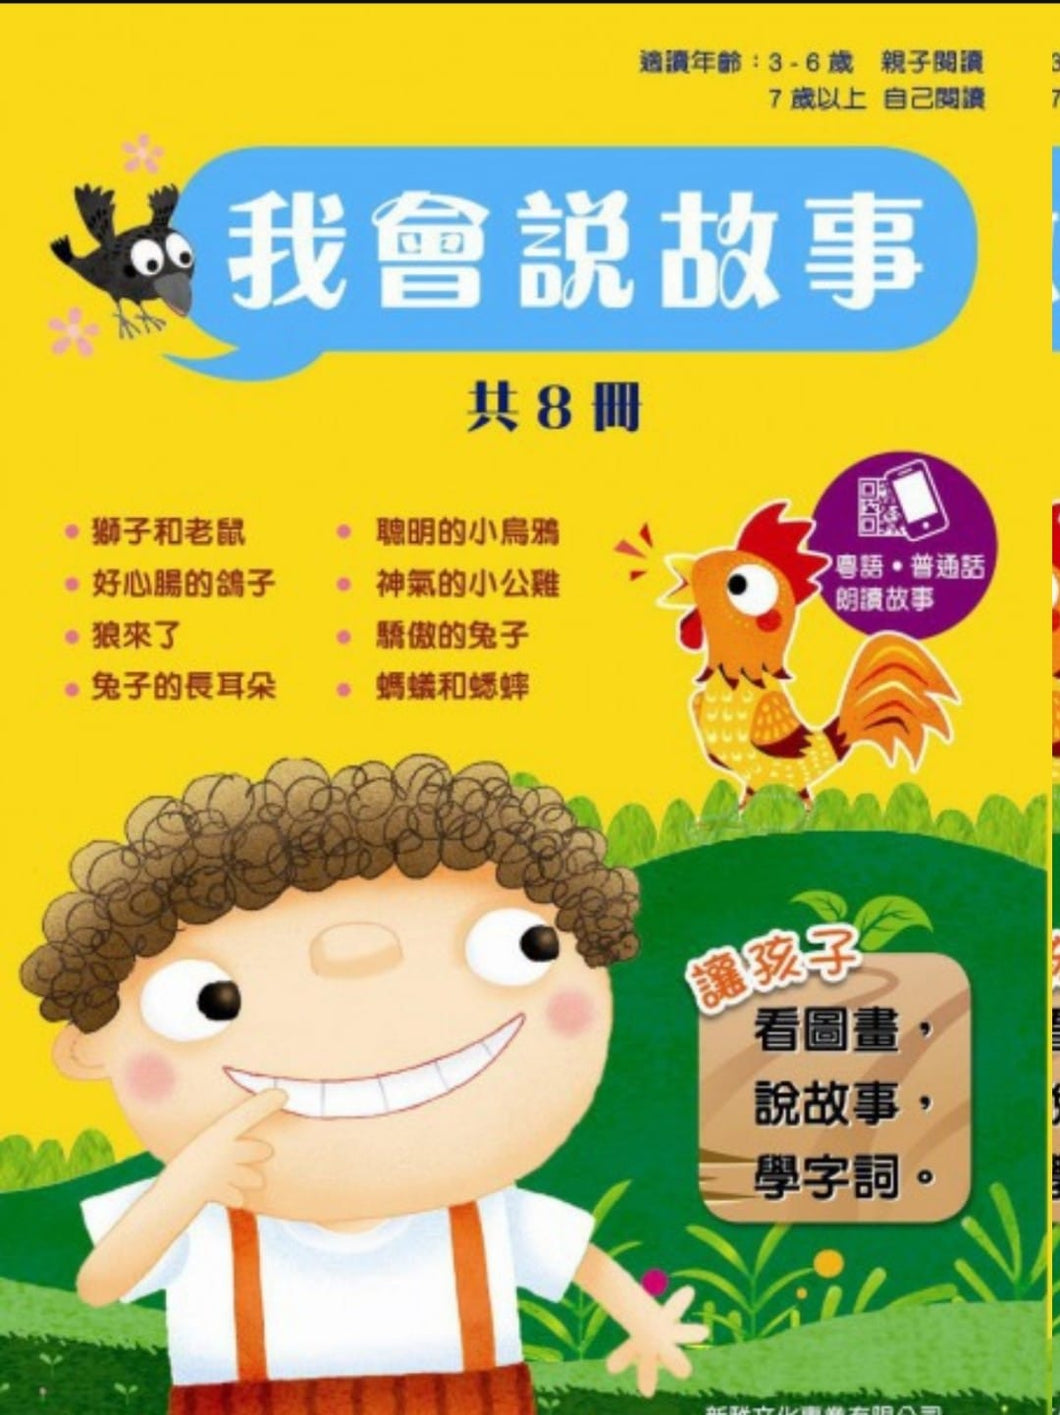 I Can Read (Set of 8) - Audio in Cantonese (Written Form) and Mandarin • 我會說故事（套裝8冊）